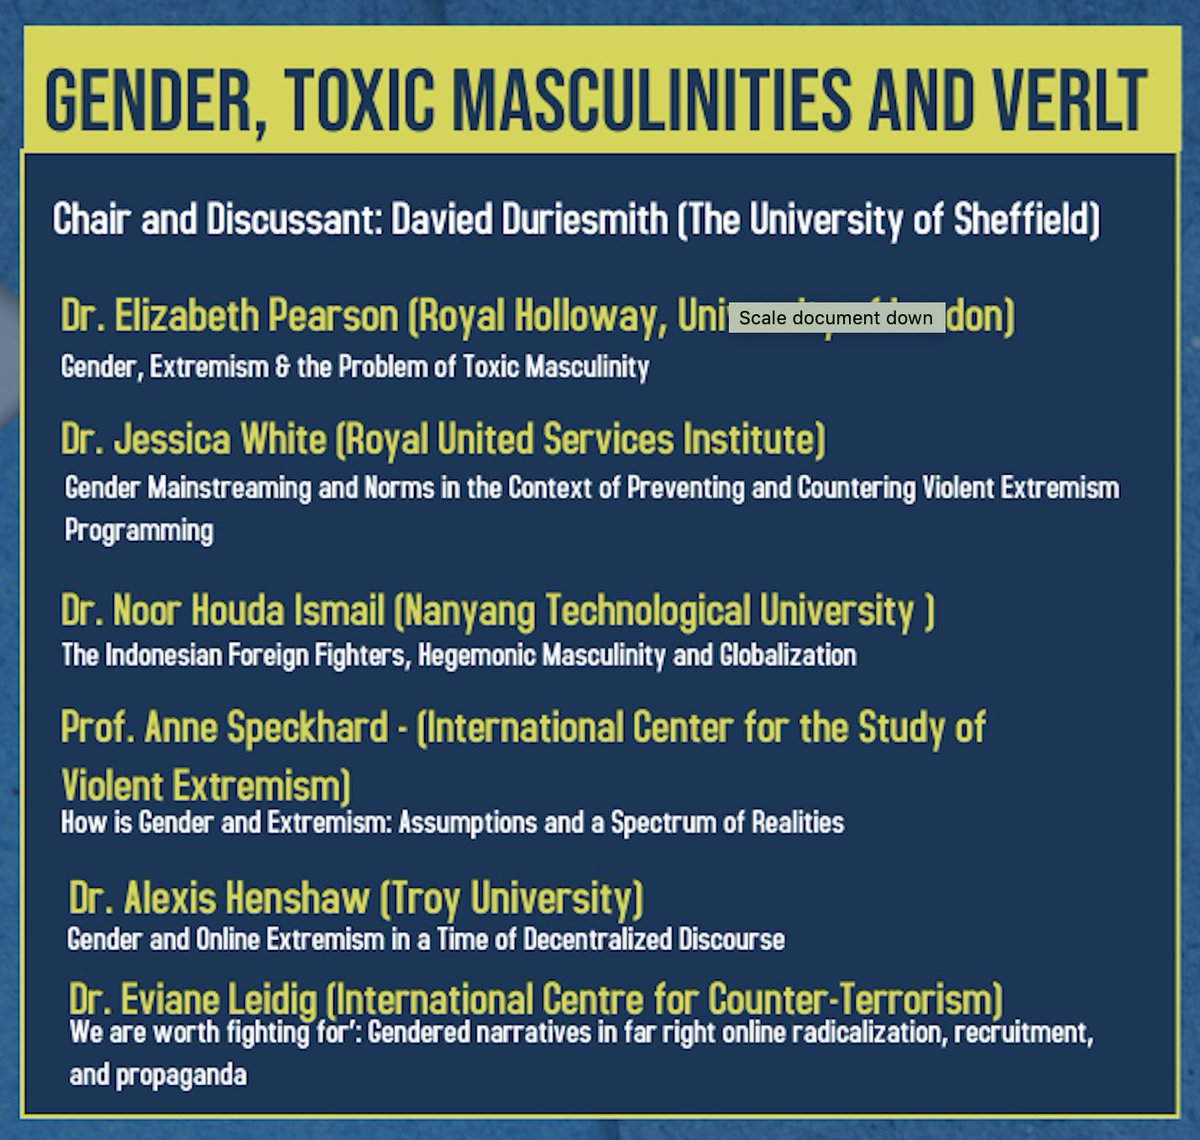 For those interested in #gender, #verlt #radicalisation #ToxicMasculinity #violence stay tunned for the @eucter Panel IV with @DavidDuriesmith @lizzypearson @J_White692 @noorhudaismail @AnneSpeckhard @Prof_Henshaw @evianeleidig